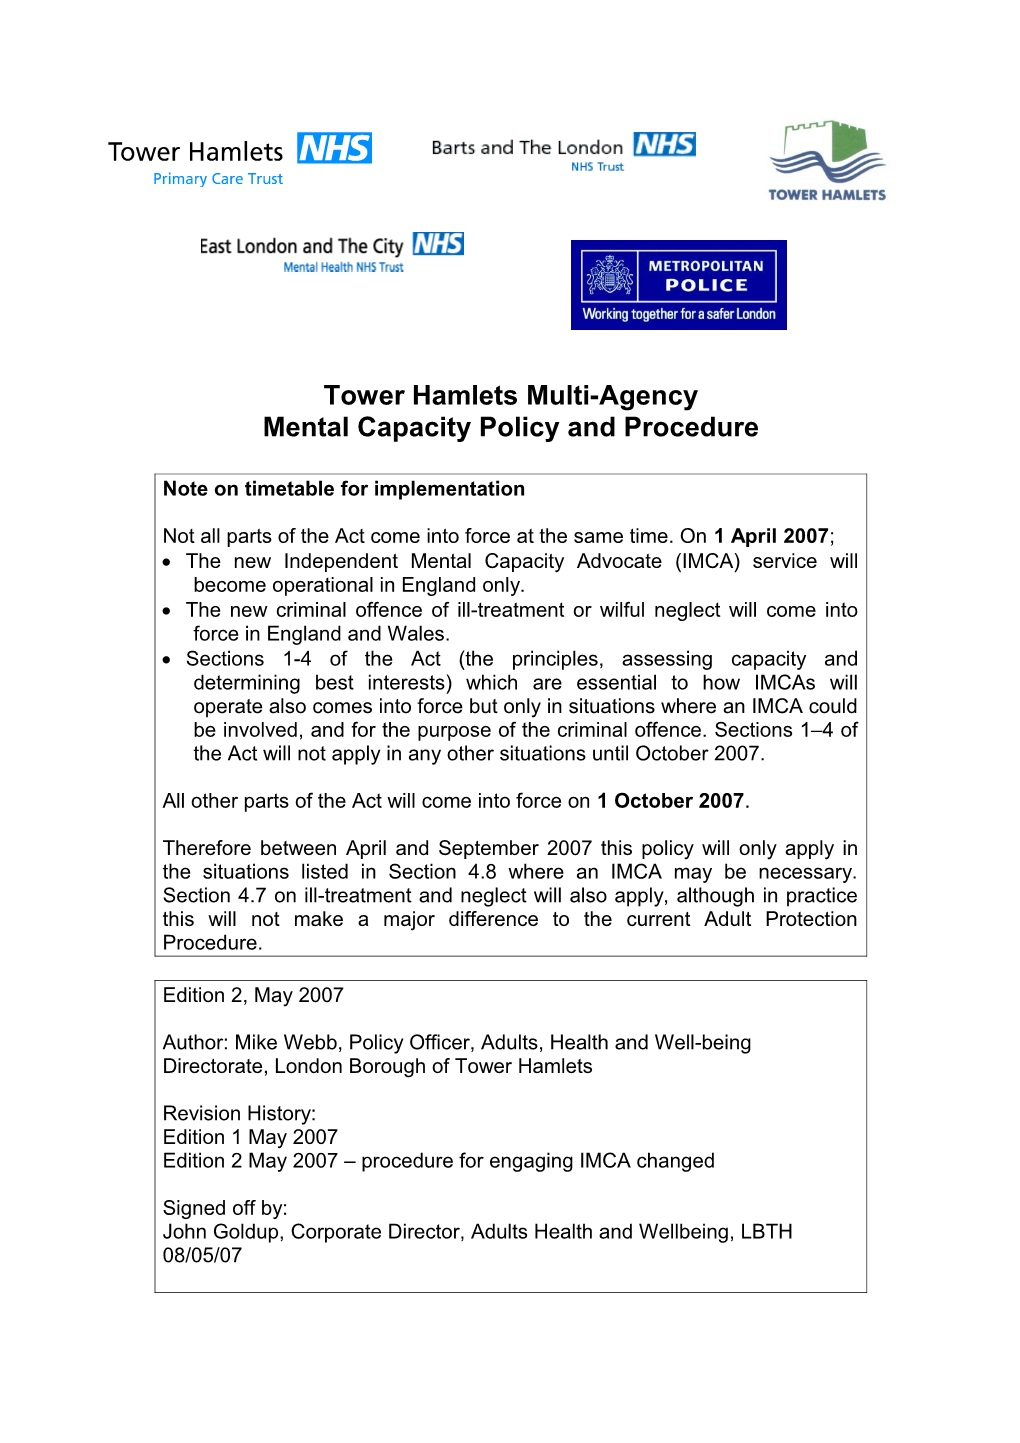 Tower Hamlets Multi-Agency Mental Capacity Act Policy and Procedure